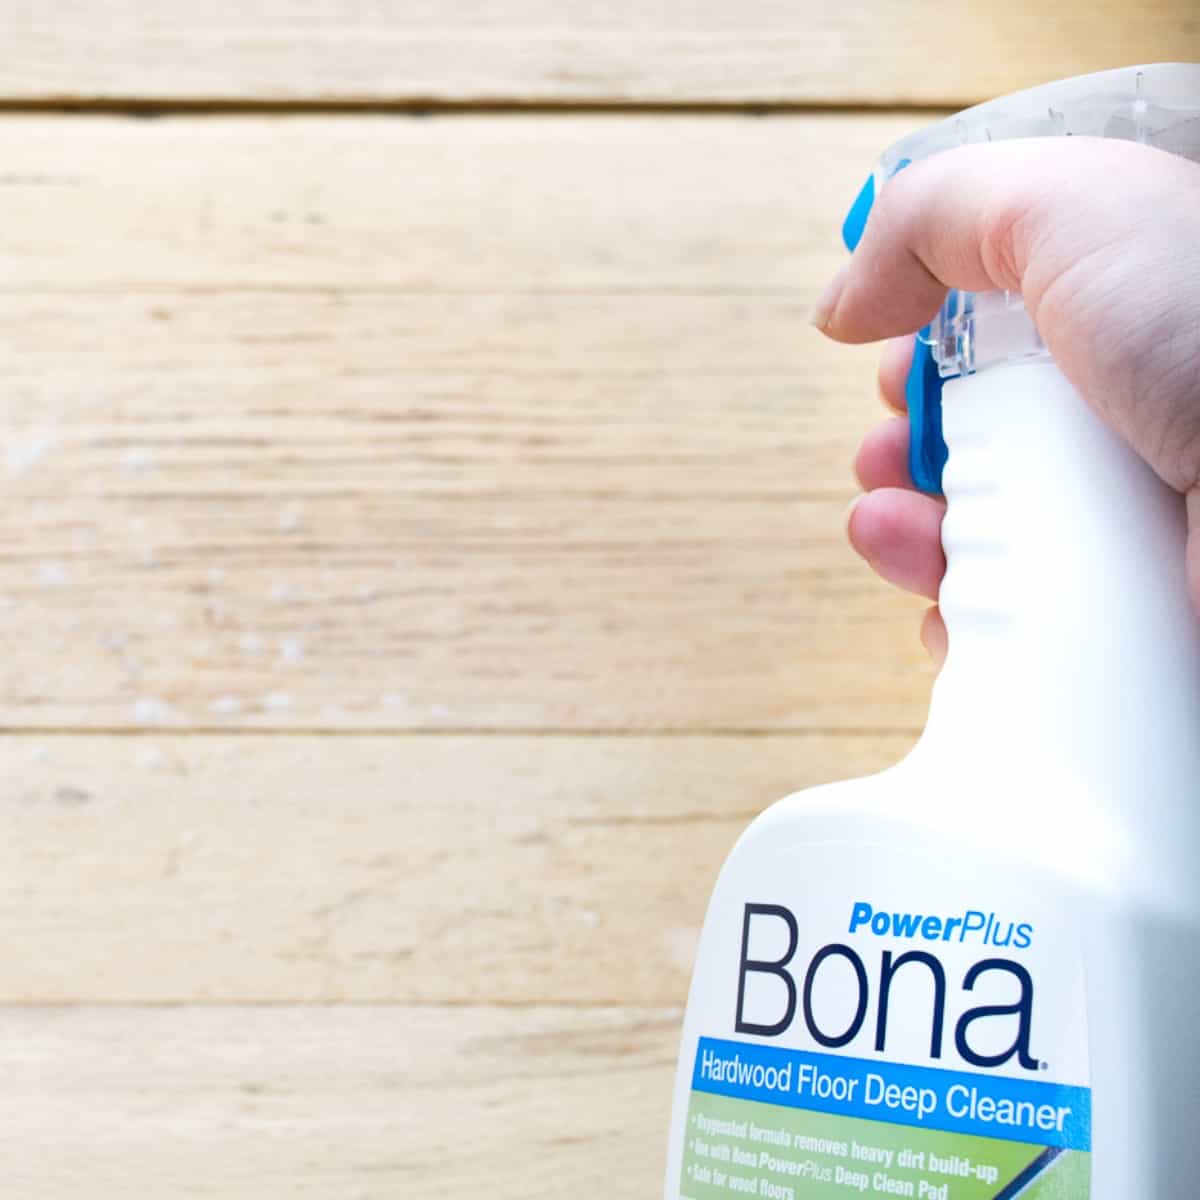 How to Clean Hardwood Floors with Bona - The Handyman's Daughter